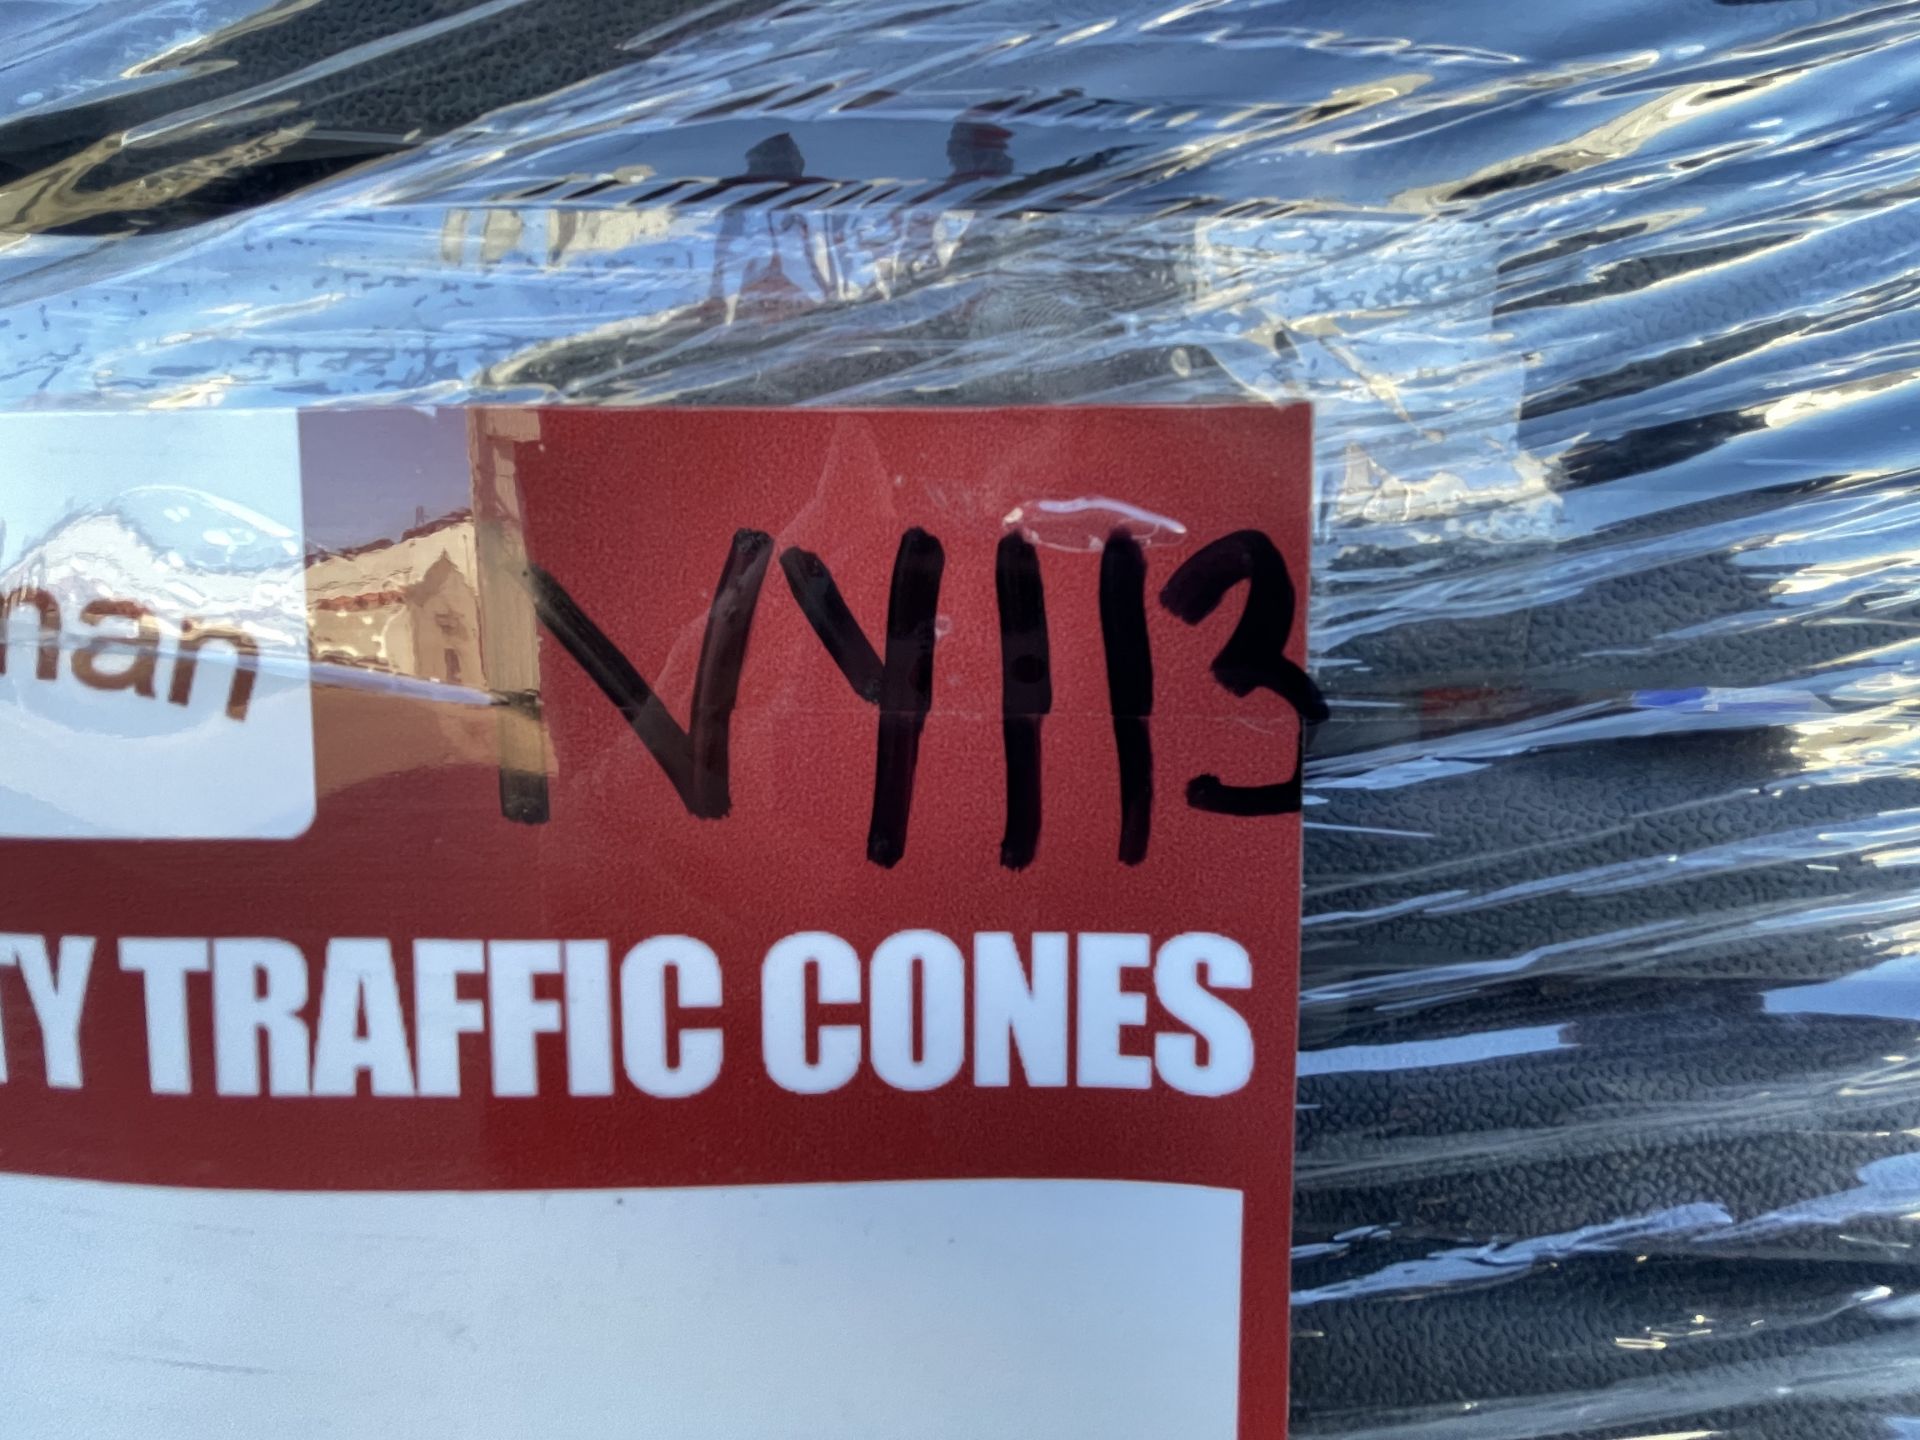 Lot of 250 Brand New Safety Highway Cones (NY113) - Image 6 of 7